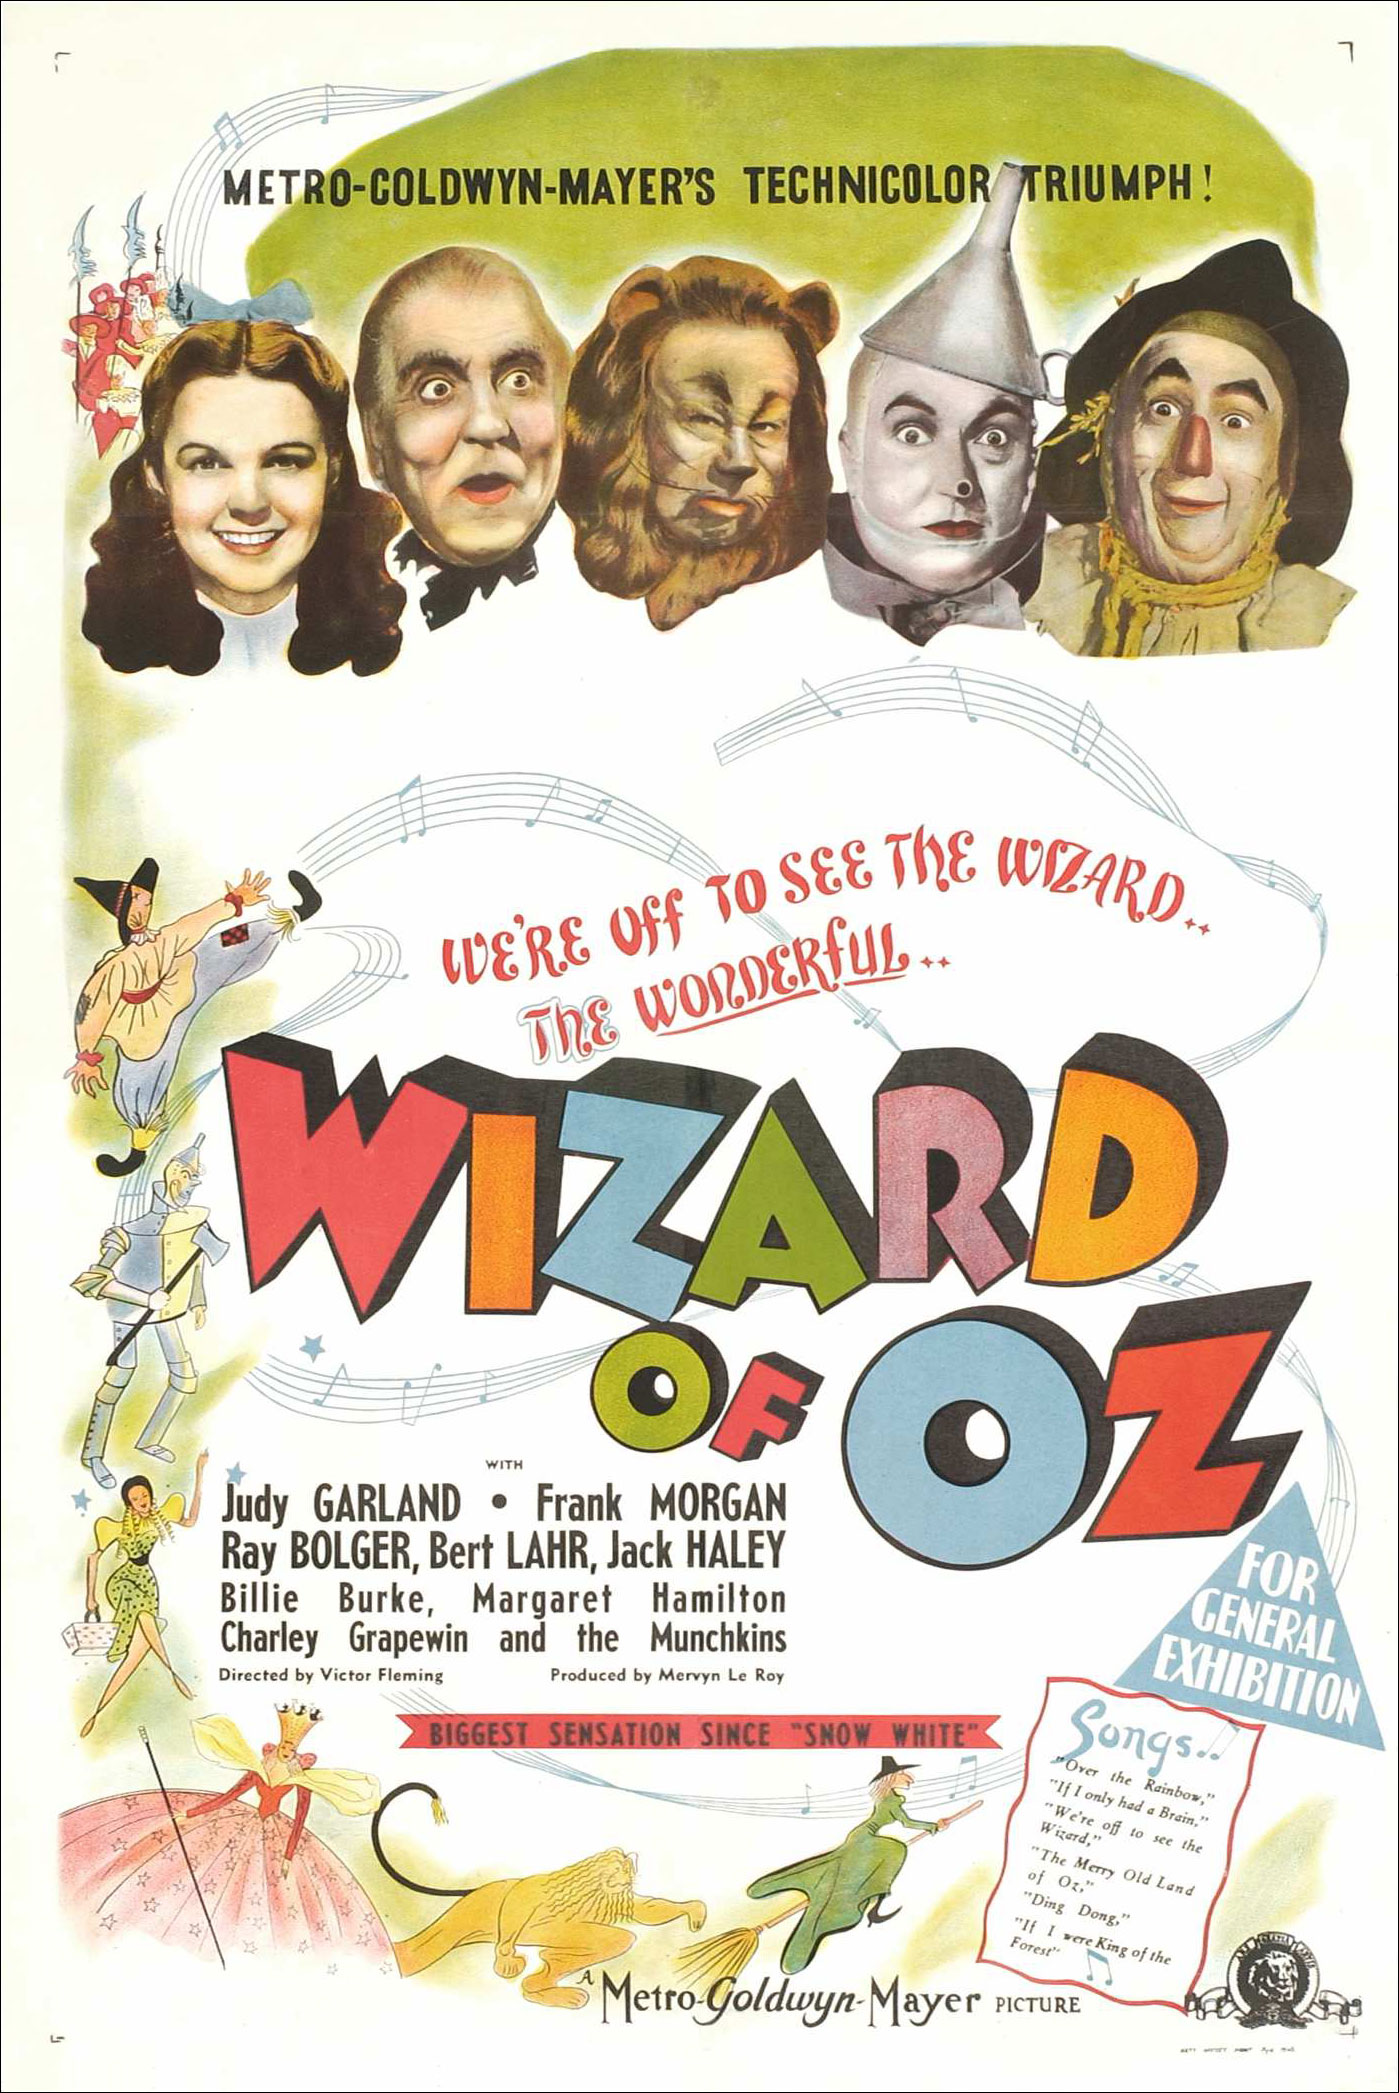 File:Wizard of oz movie poster.jpg - Wikimedia Commons